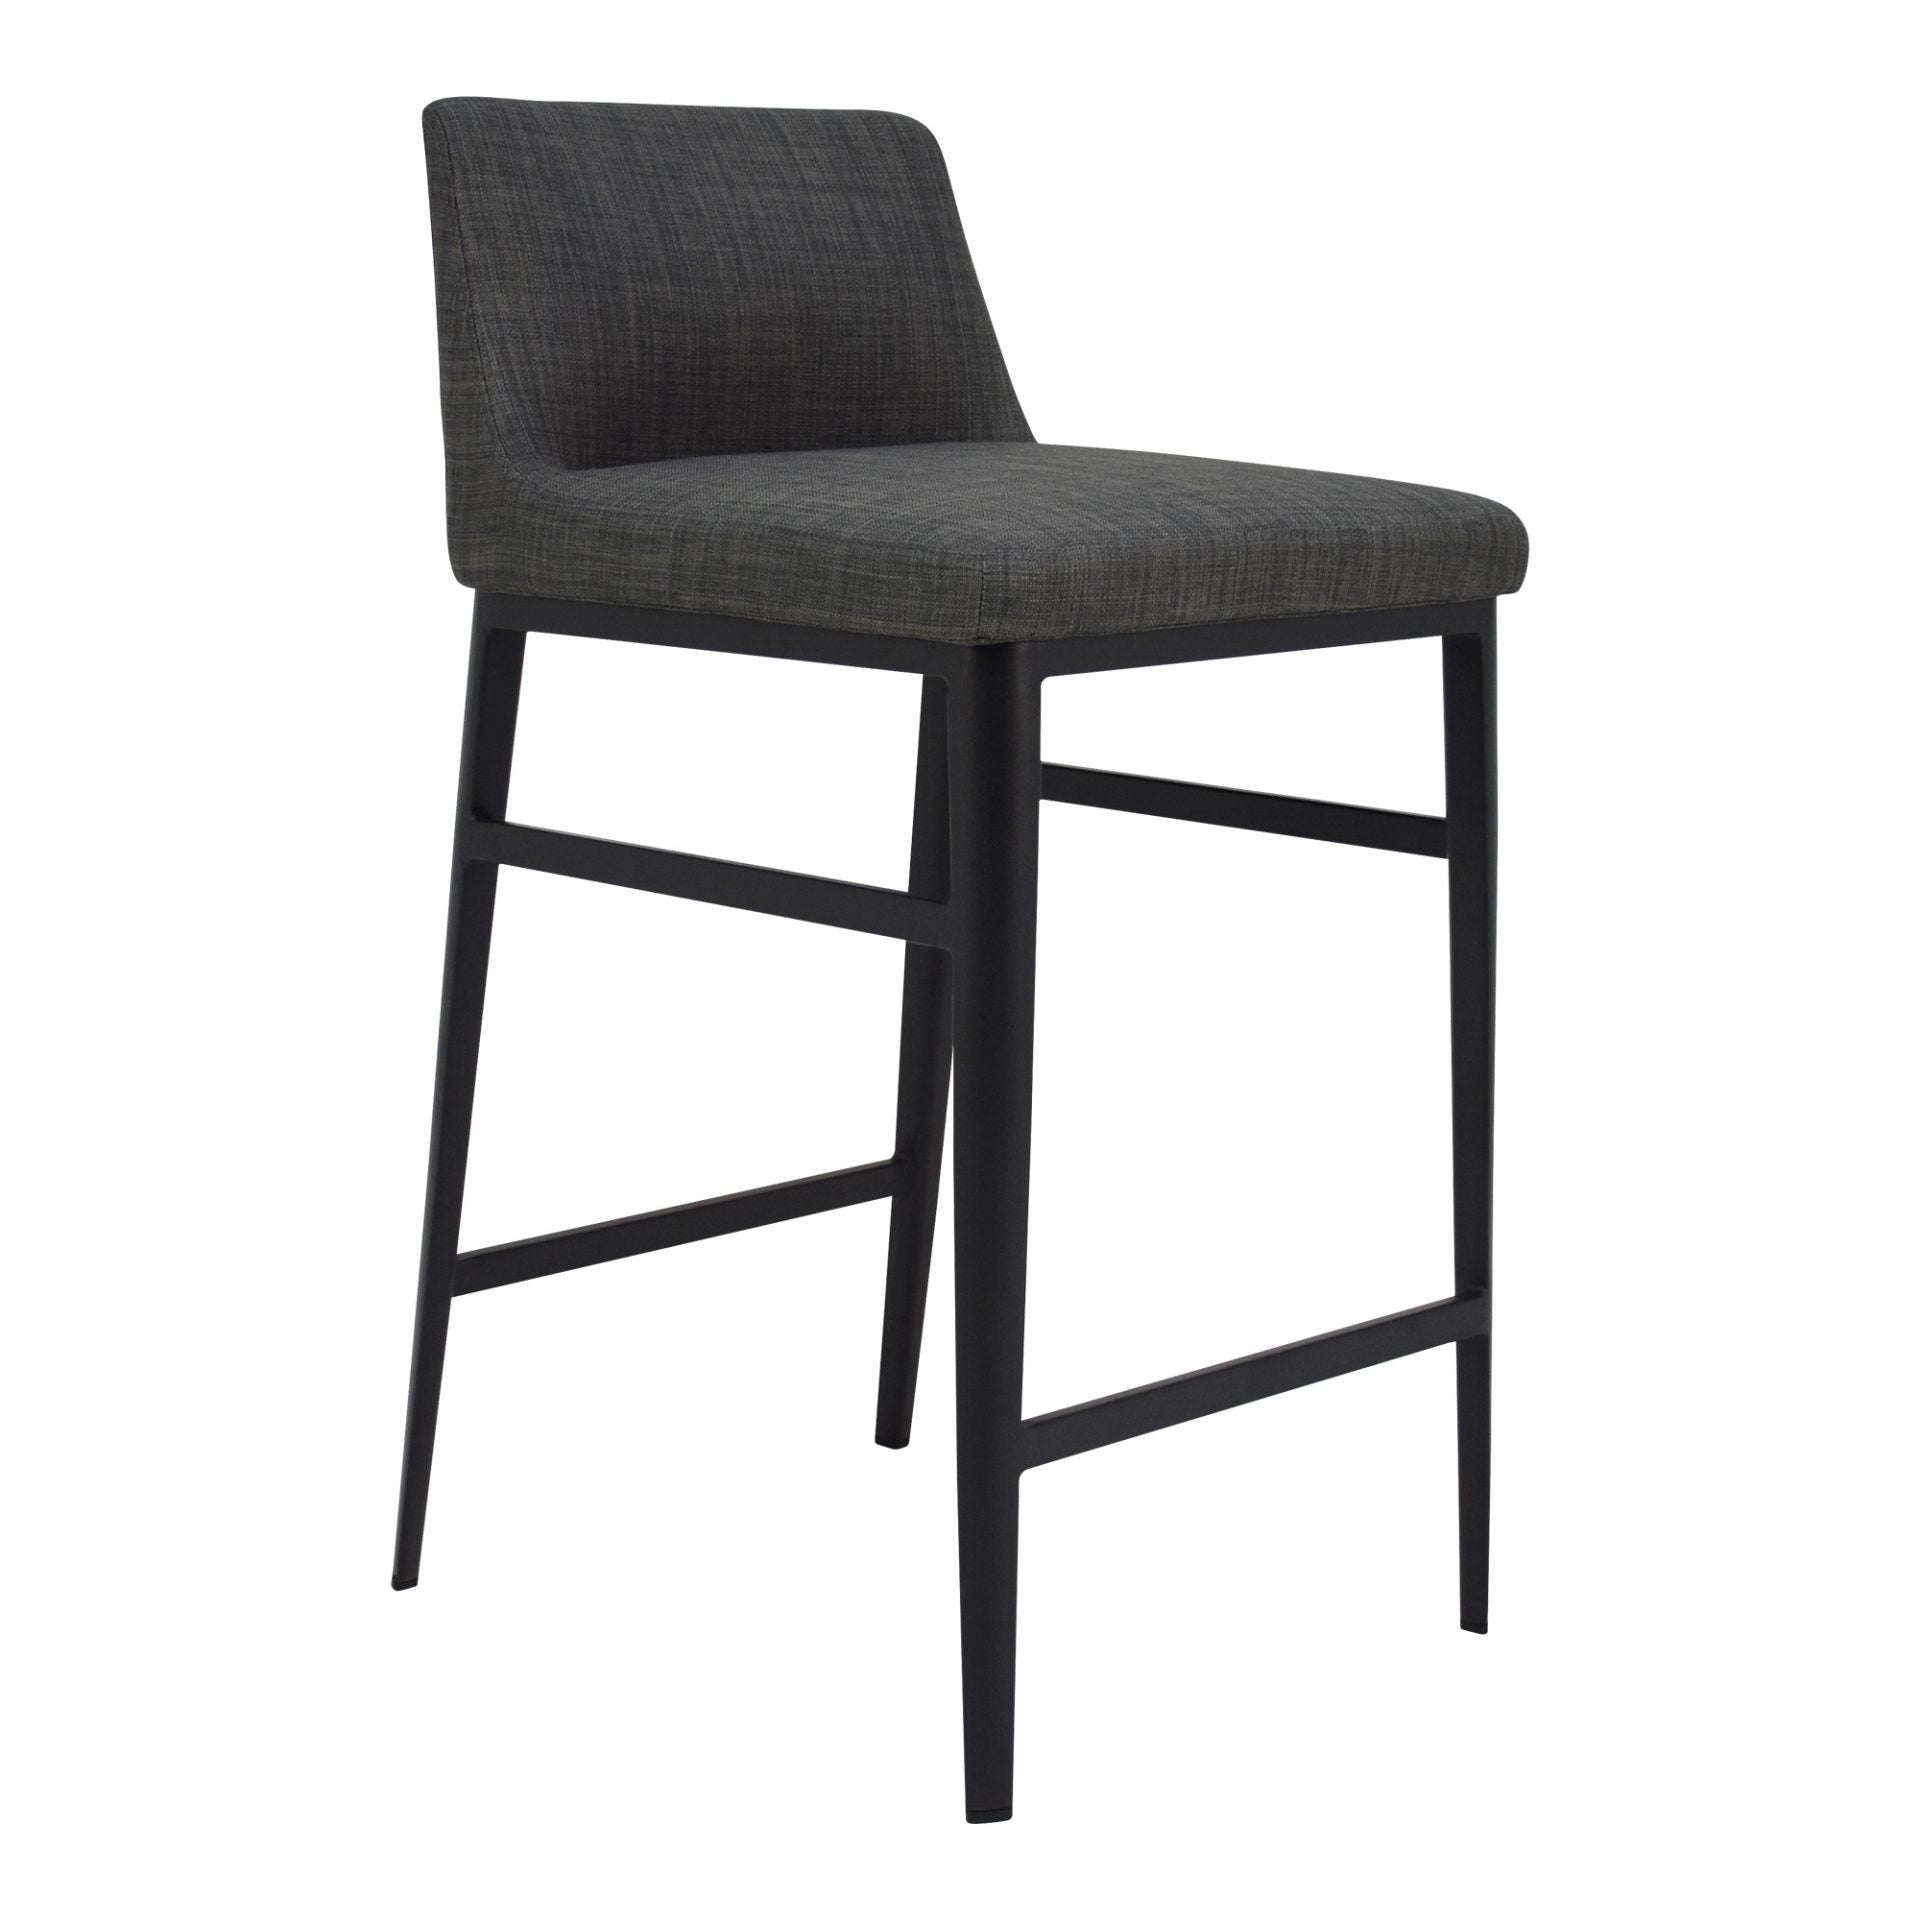 The low-backed profile of the Baron Counter + Bar Stool - Charcoal gives a stylish and compact aesthetic. The charcoal-grey mix upholstery adds texture and sophistication to your dining or kitchen space.